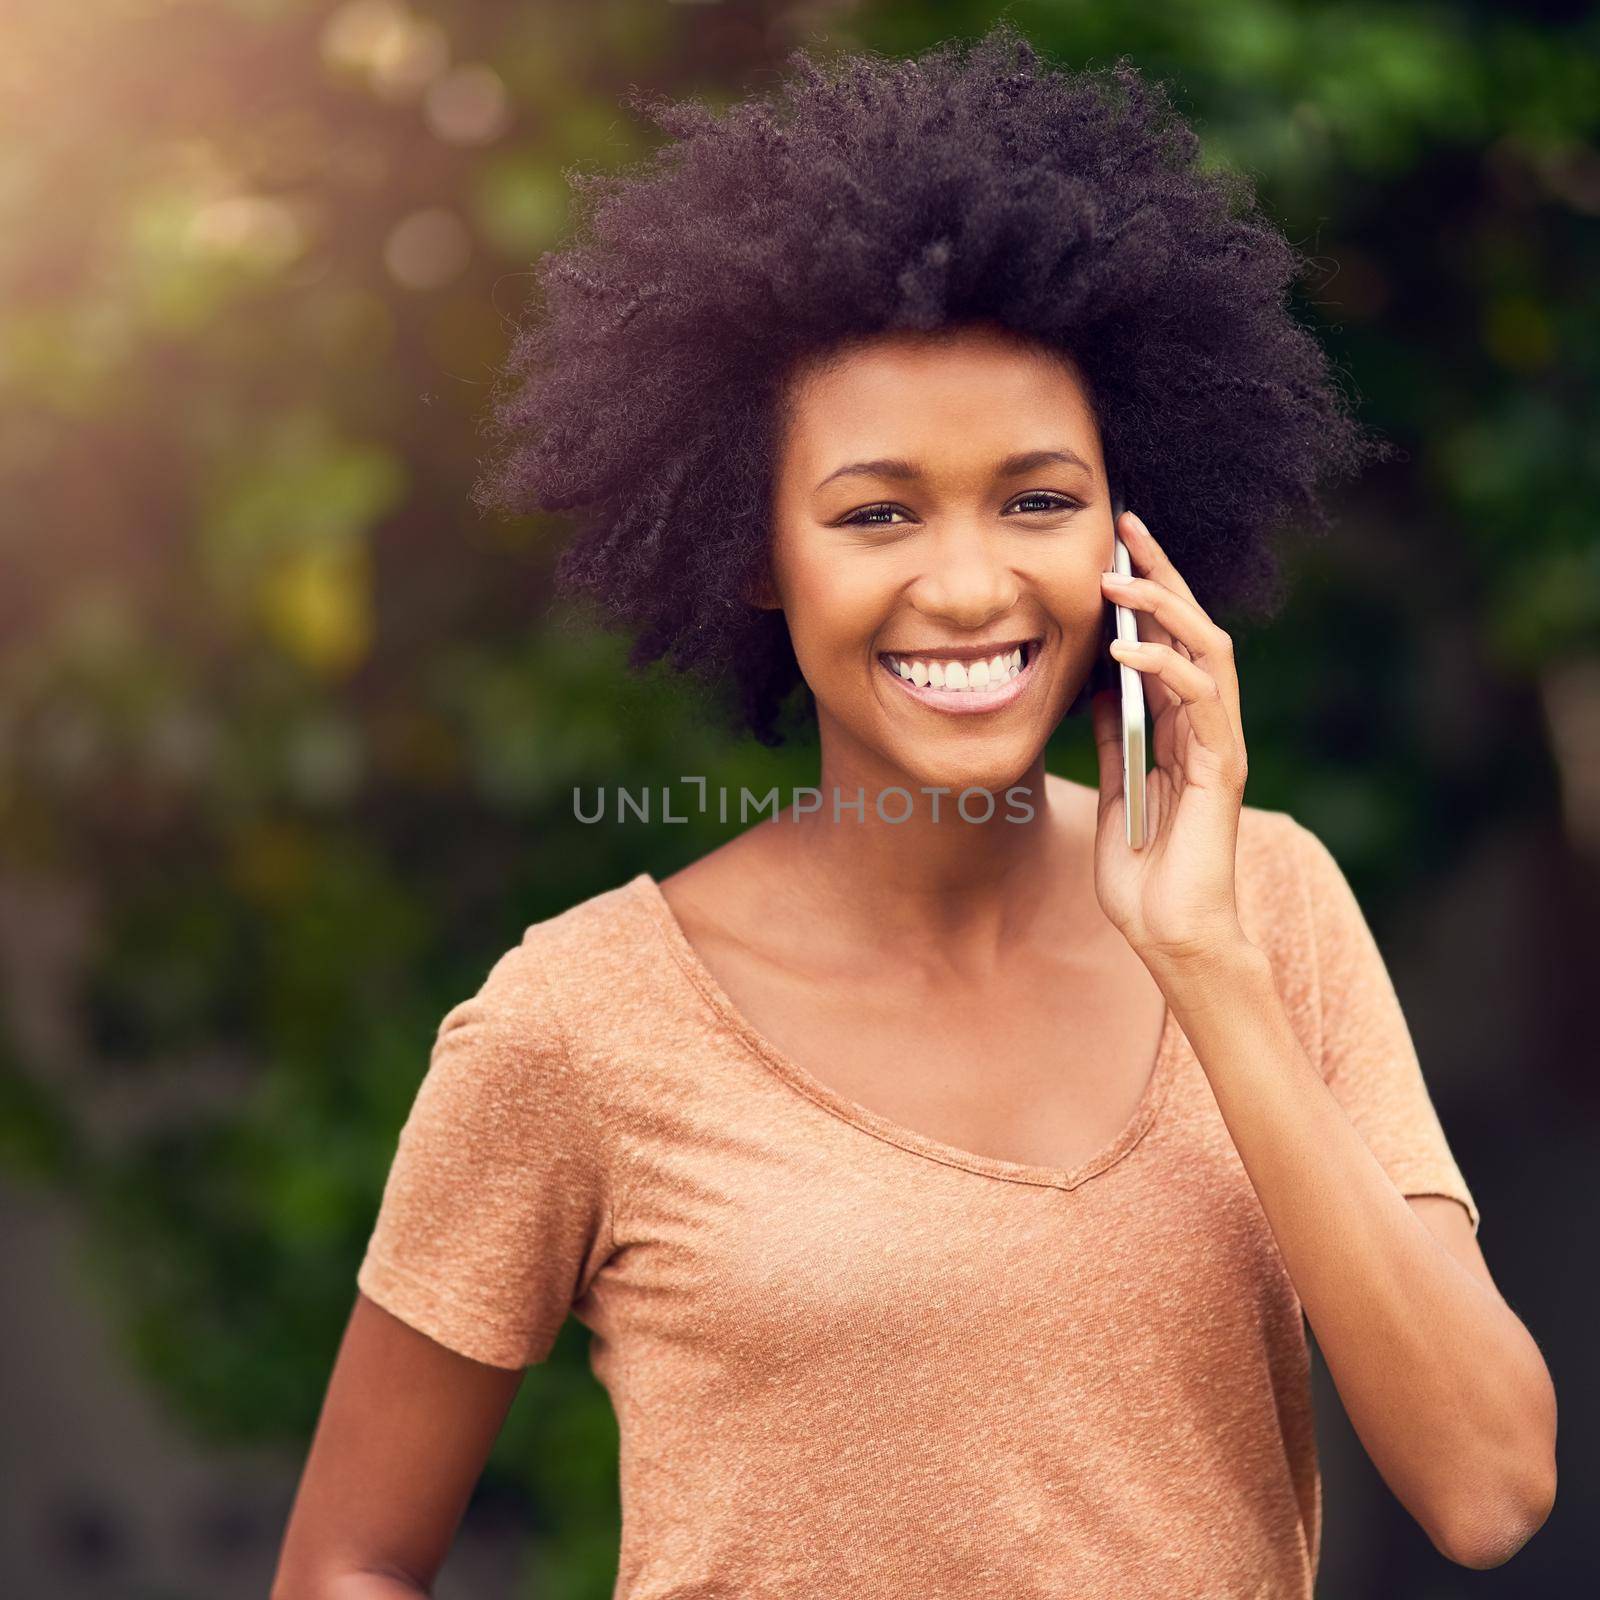 I feel happy and connected in the great outdoors. a young woman talking on her cellphone while spending the day outdoors